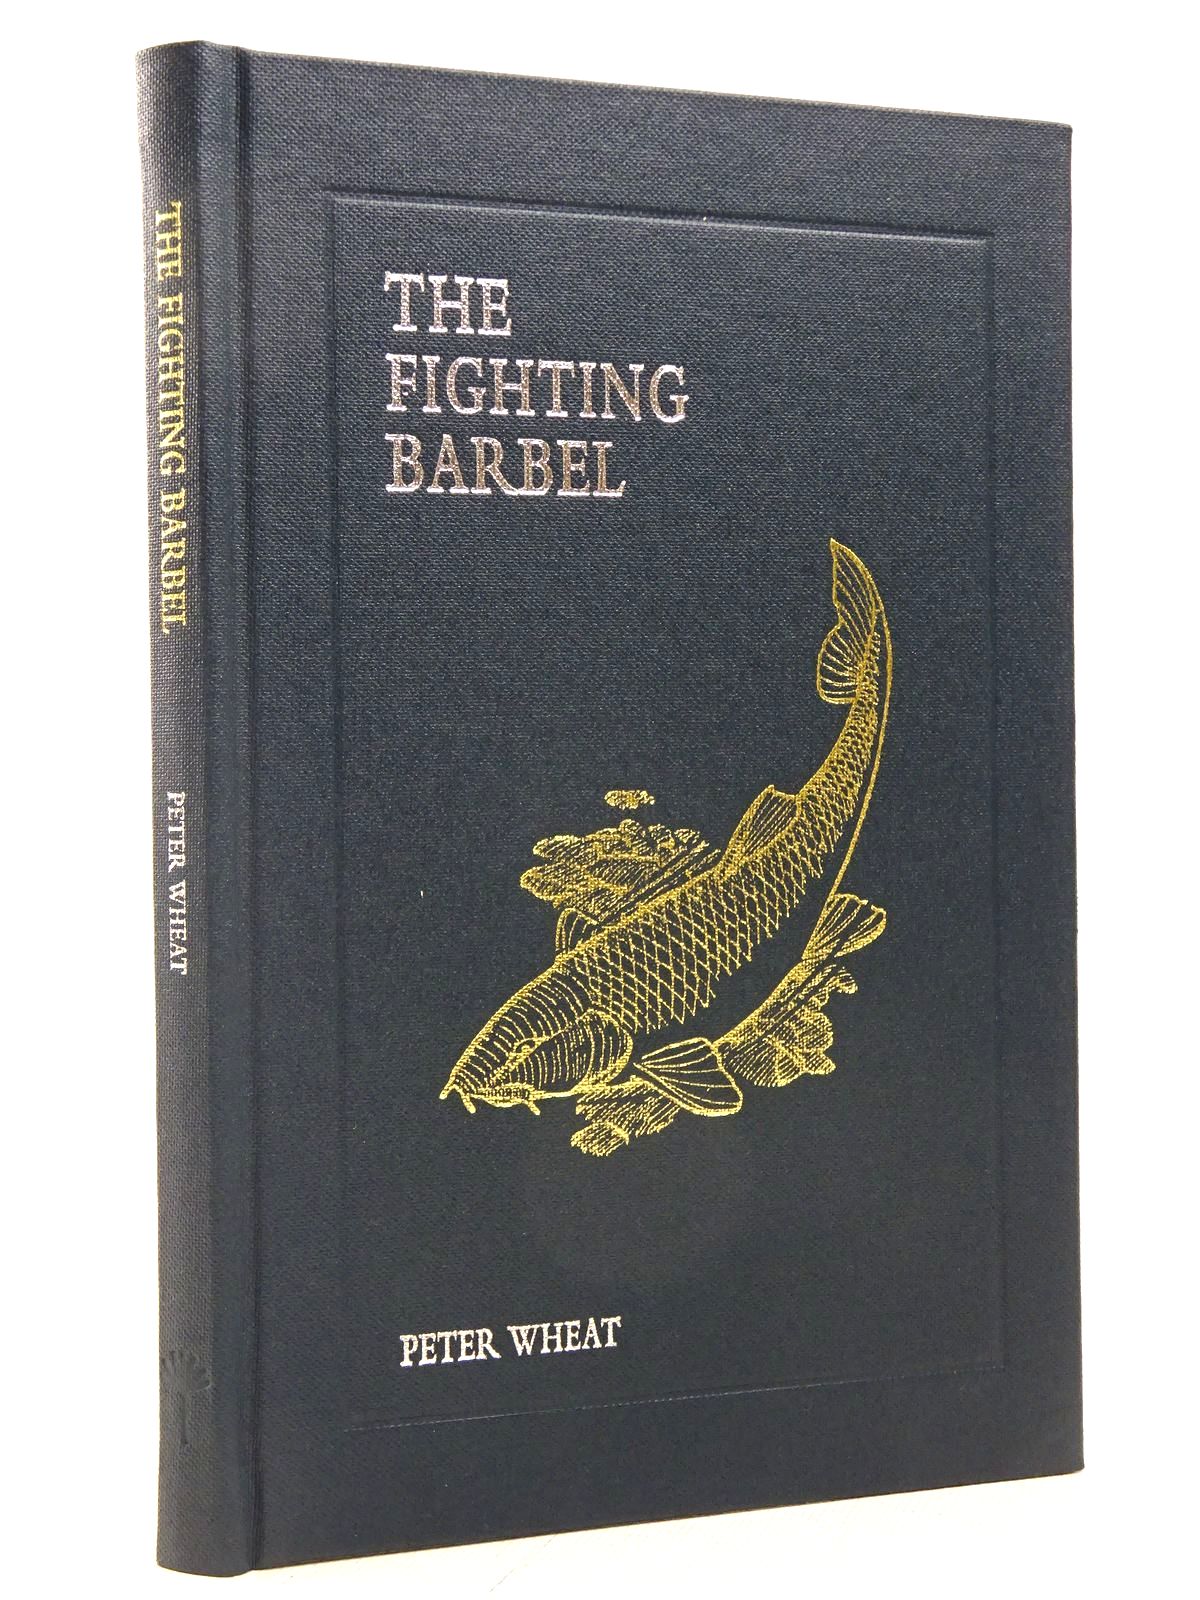 Photo of THE FIGHTING BARBEL written by Wheat, Peter published by The Medlar Press (STOCK CODE: 1817244)  for sale by Stella & Rose's Books